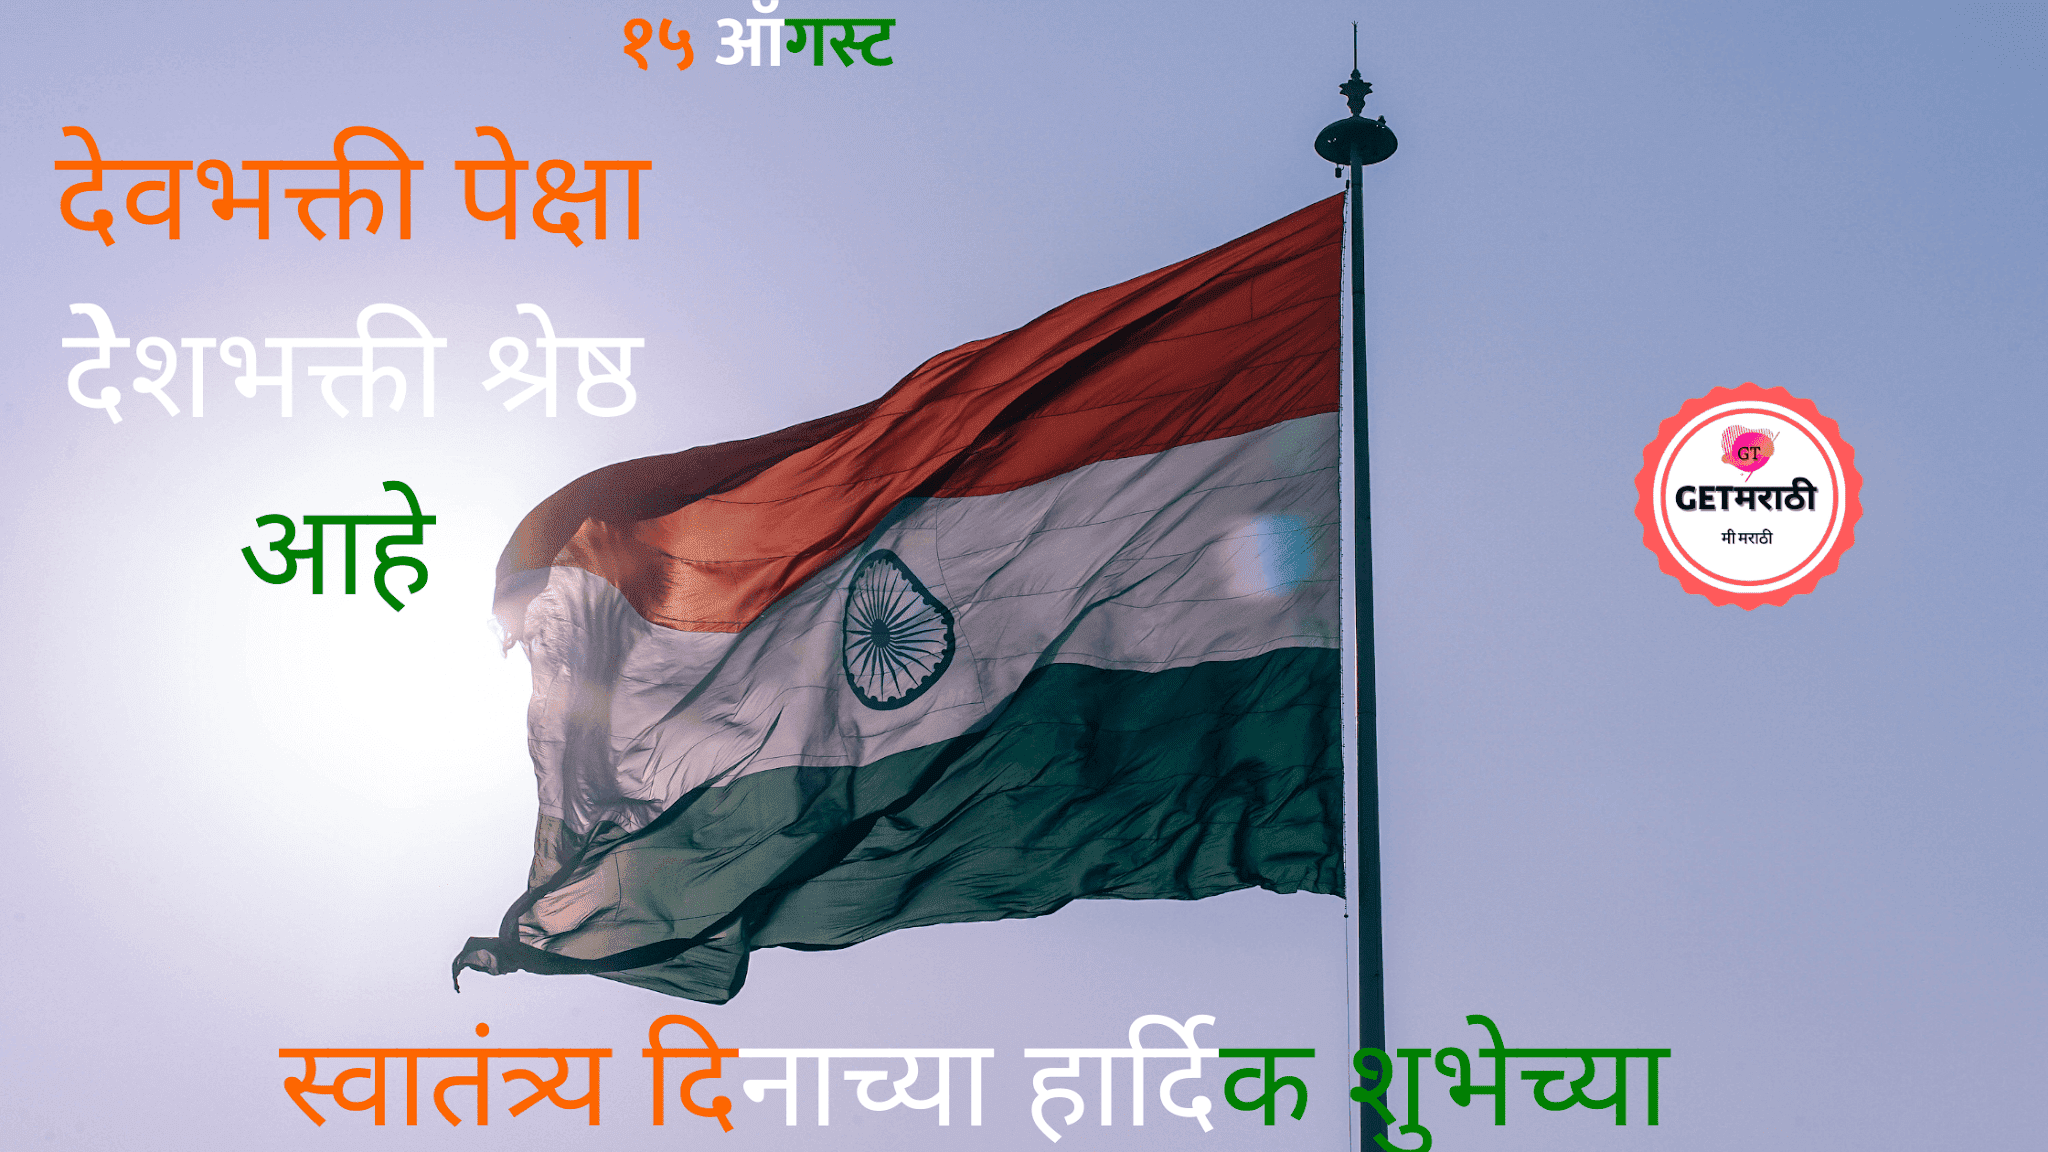 Happy Independence Day Quotes, Message In Marathi